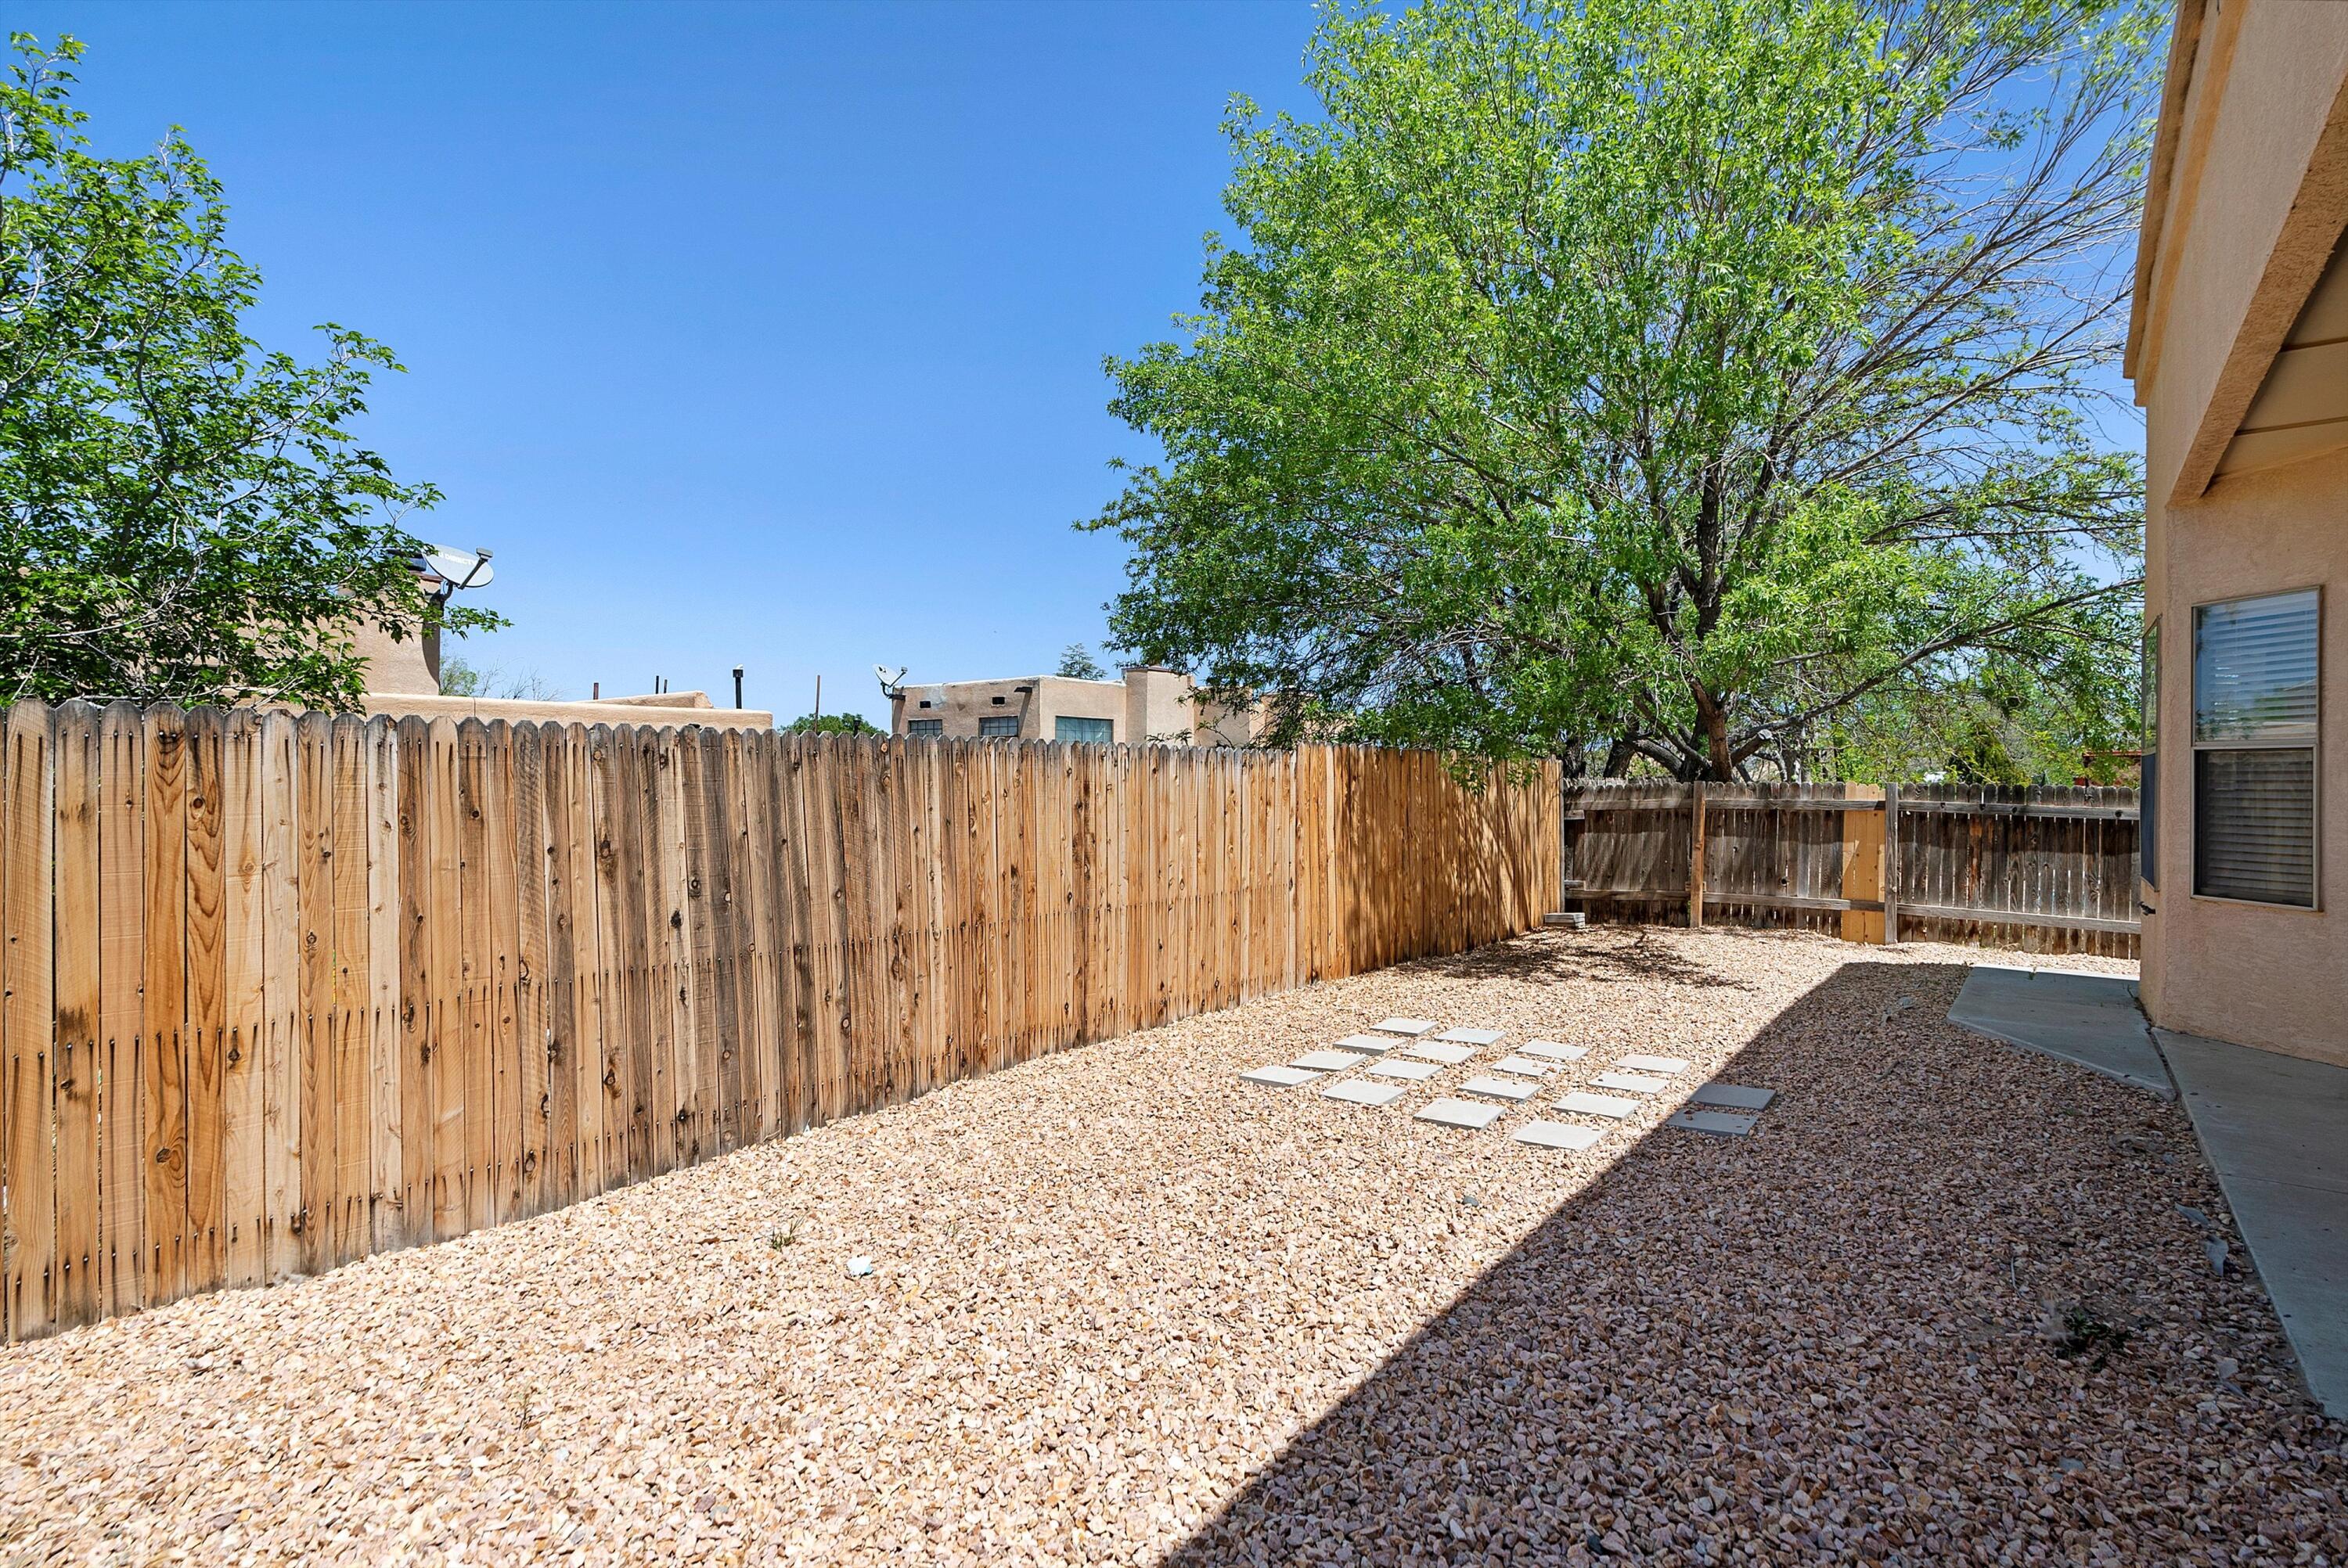 7323 Niquel Place NW, Albuquerque, New Mexico 87120, 3 Bedrooms Bedrooms, ,2 BathroomsBathrooms,Residential,For Sale,7323 Niquel Place NW,1061805